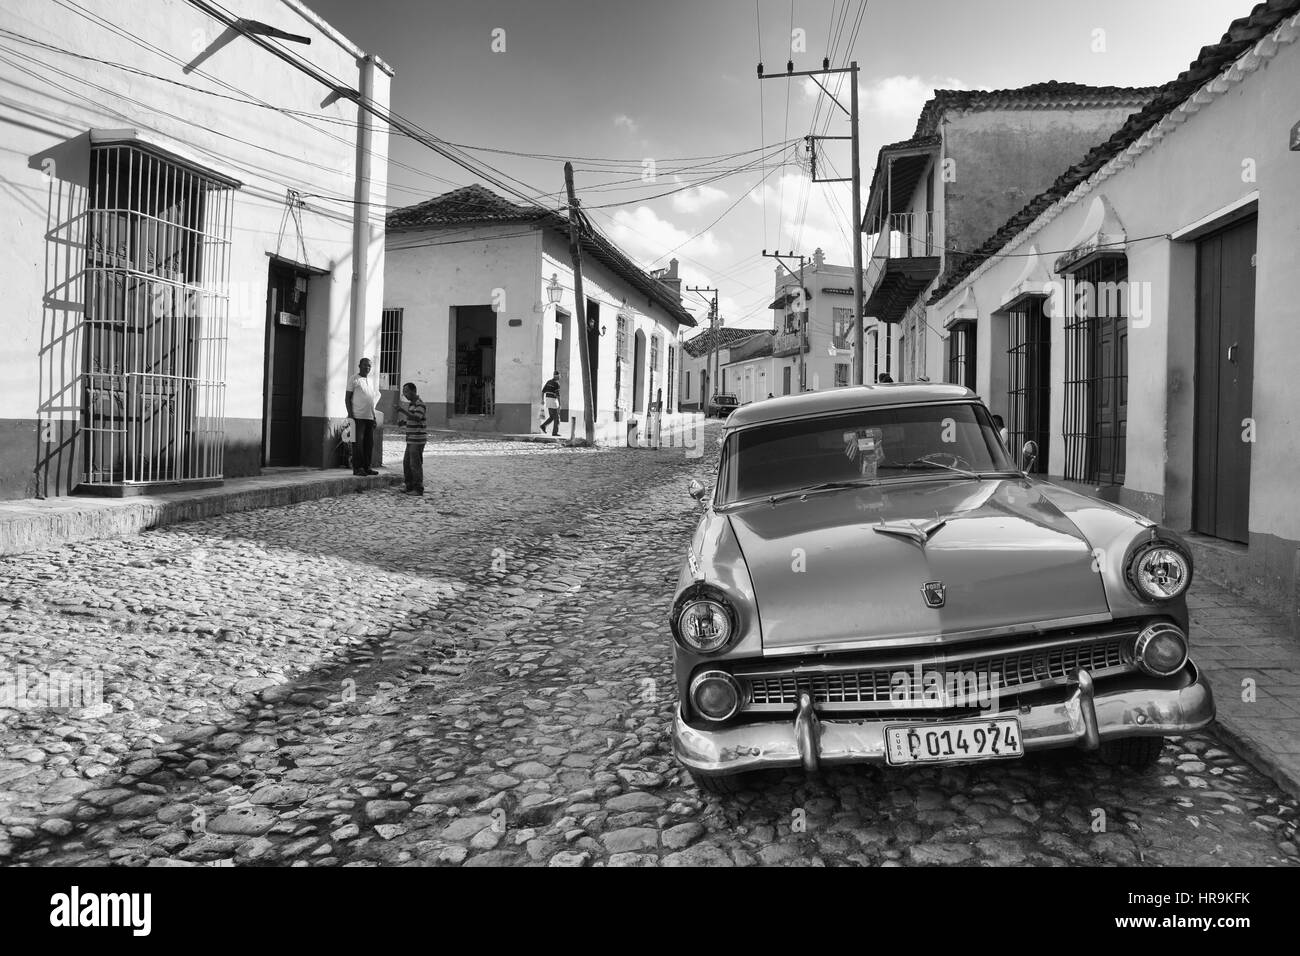 Trinidad, Cuba - January 29,2017: Old american car on the road in Trinidad, Cuba.Thousands of these cars are still in use in Cuba and they have become Stock Photo